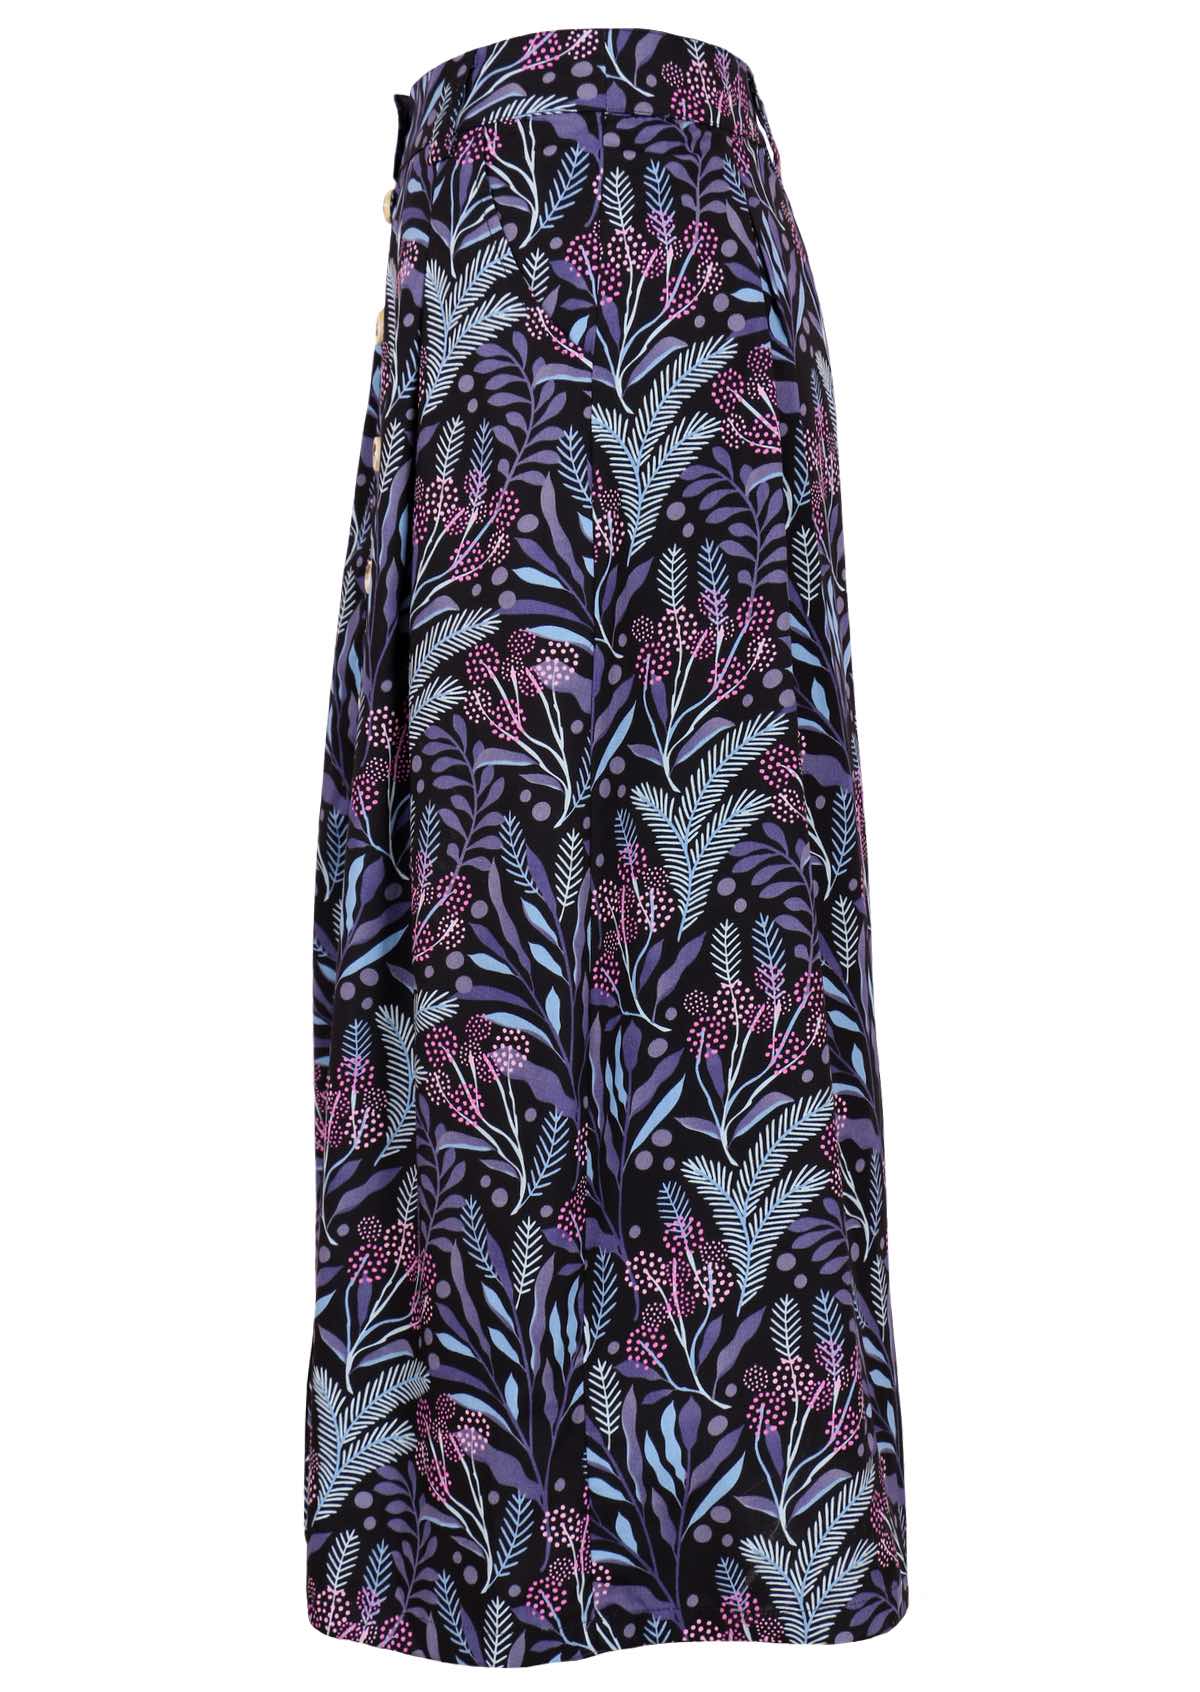 Black based botanical print in blues and pinks cotton skirt